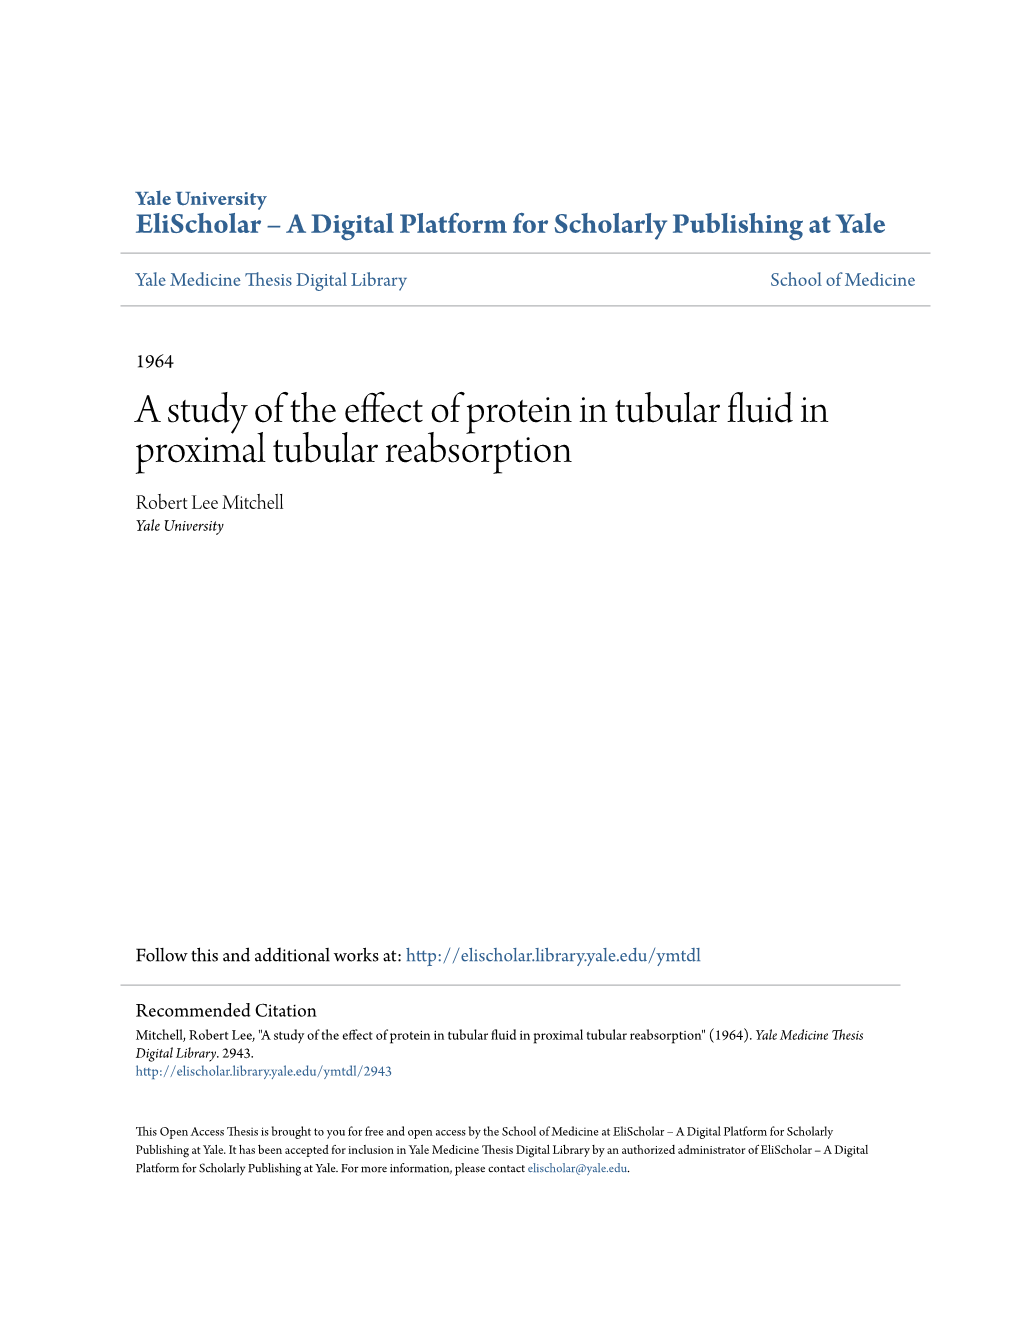 A Study of the Effect of Protein in Tubular Fluid in Proximal Tubular Reabsorption Robert Lee Mitchell Yale University